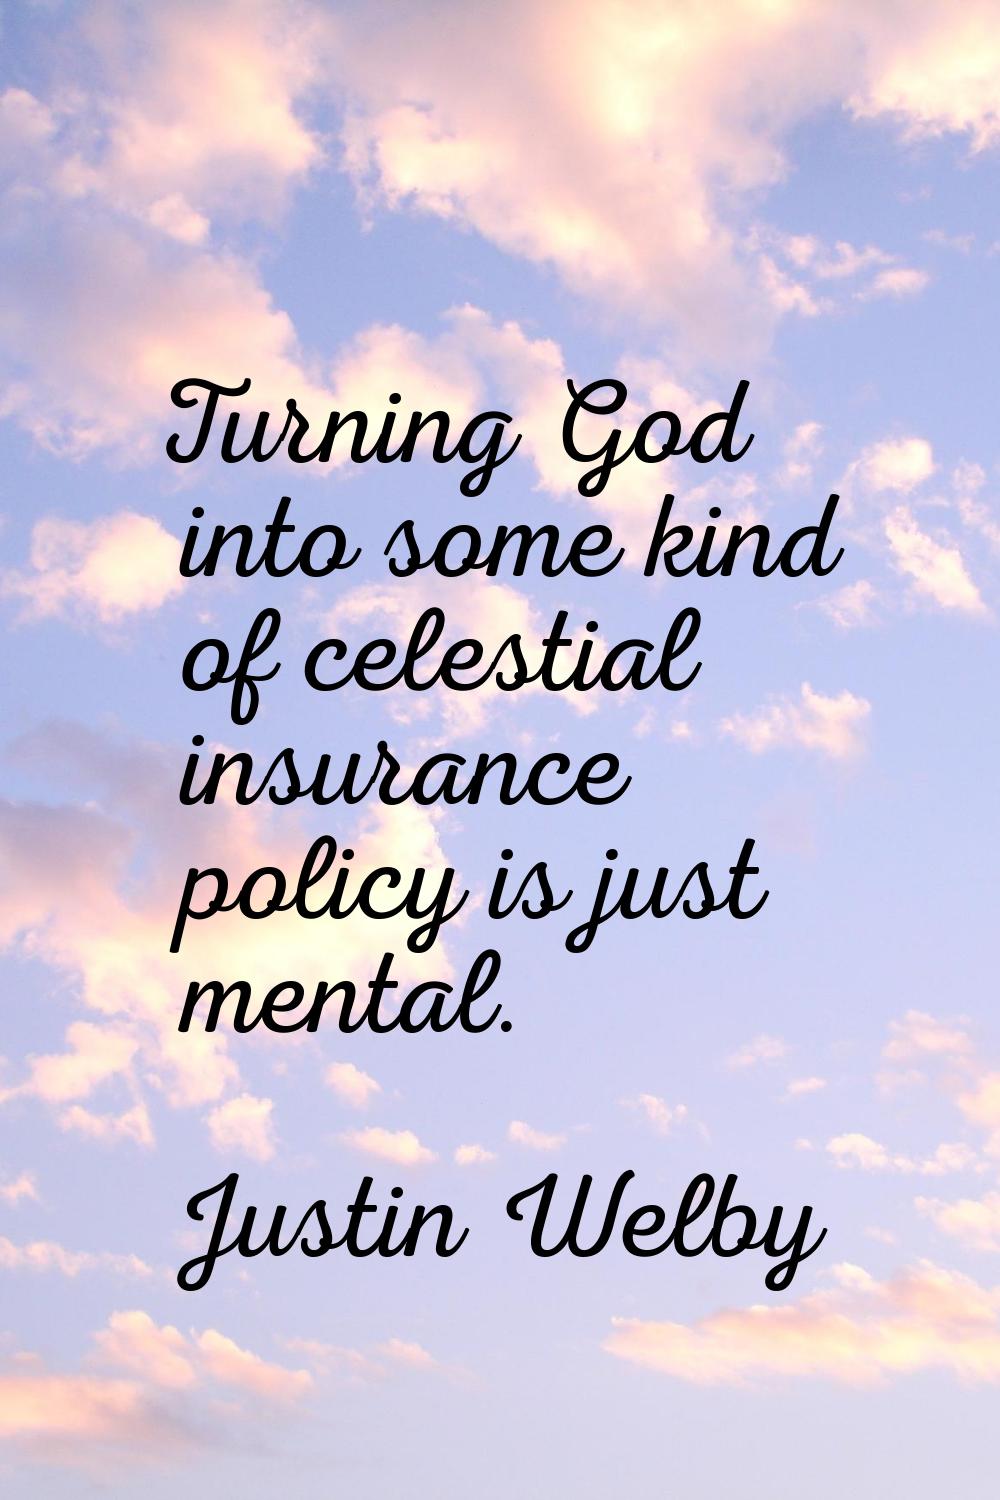 Turning God into some kind of celestial insurance policy is just mental.